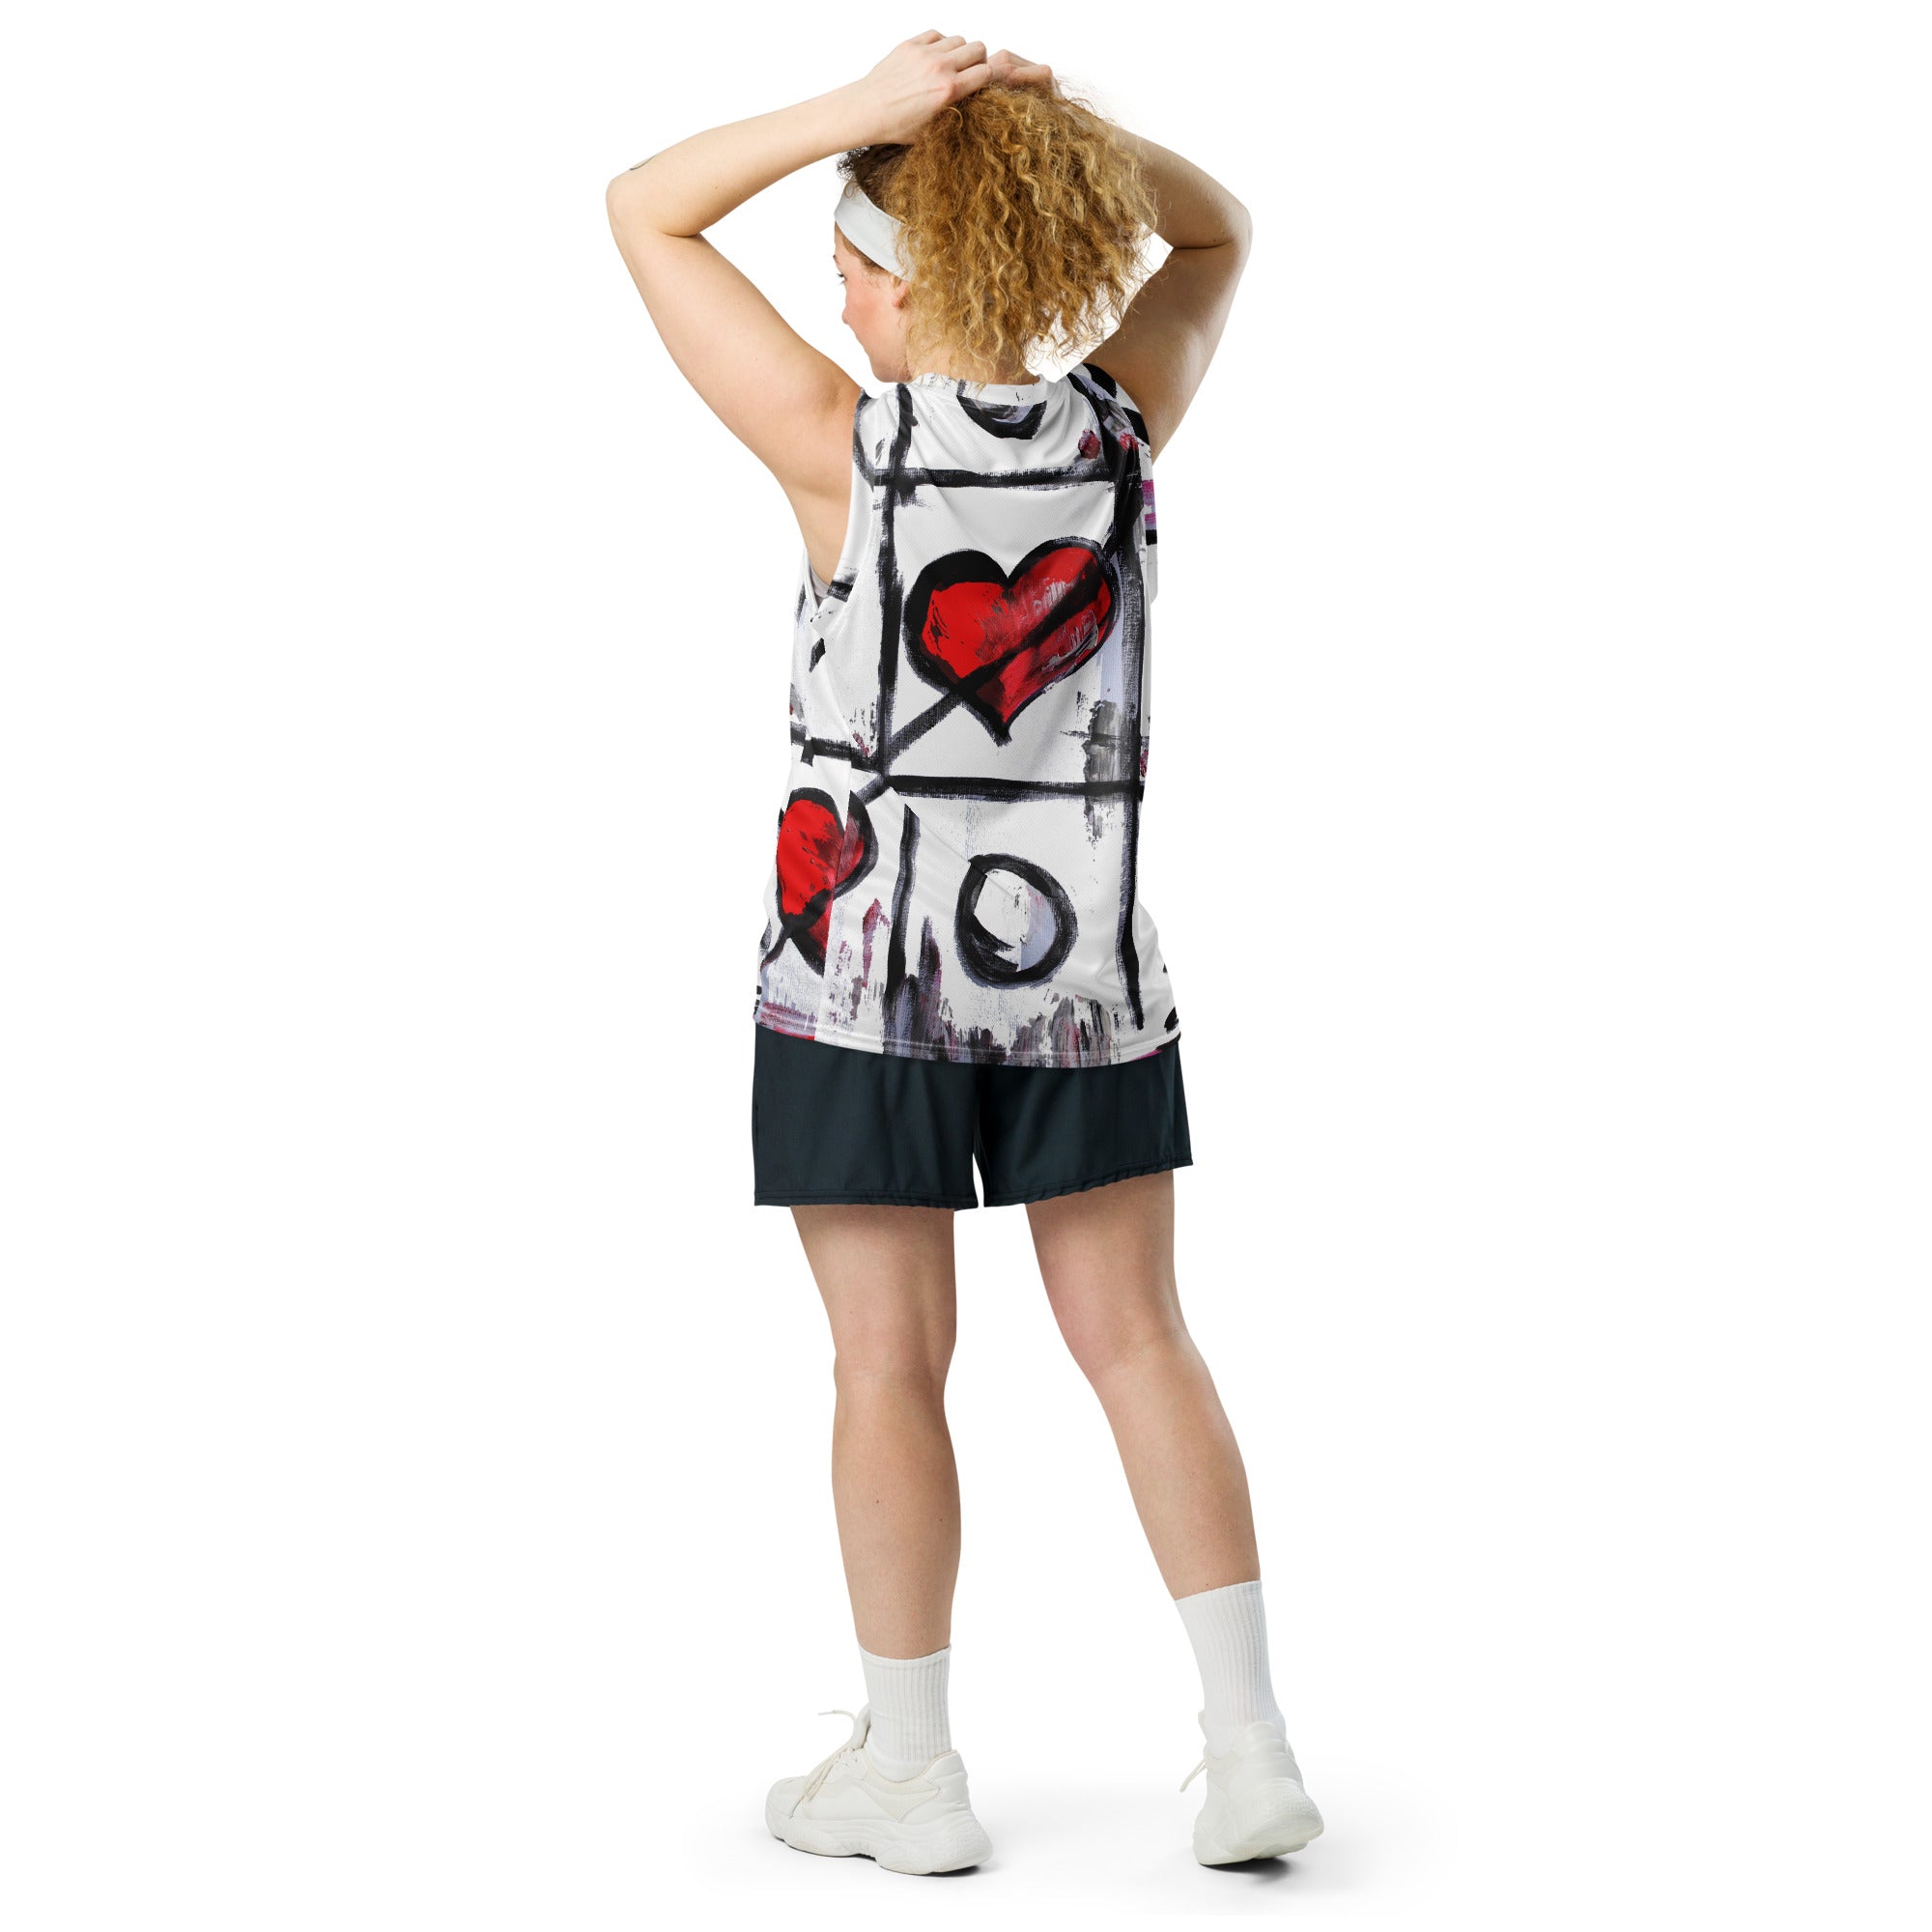 "Love wins " Recycled unisex basketball jersey